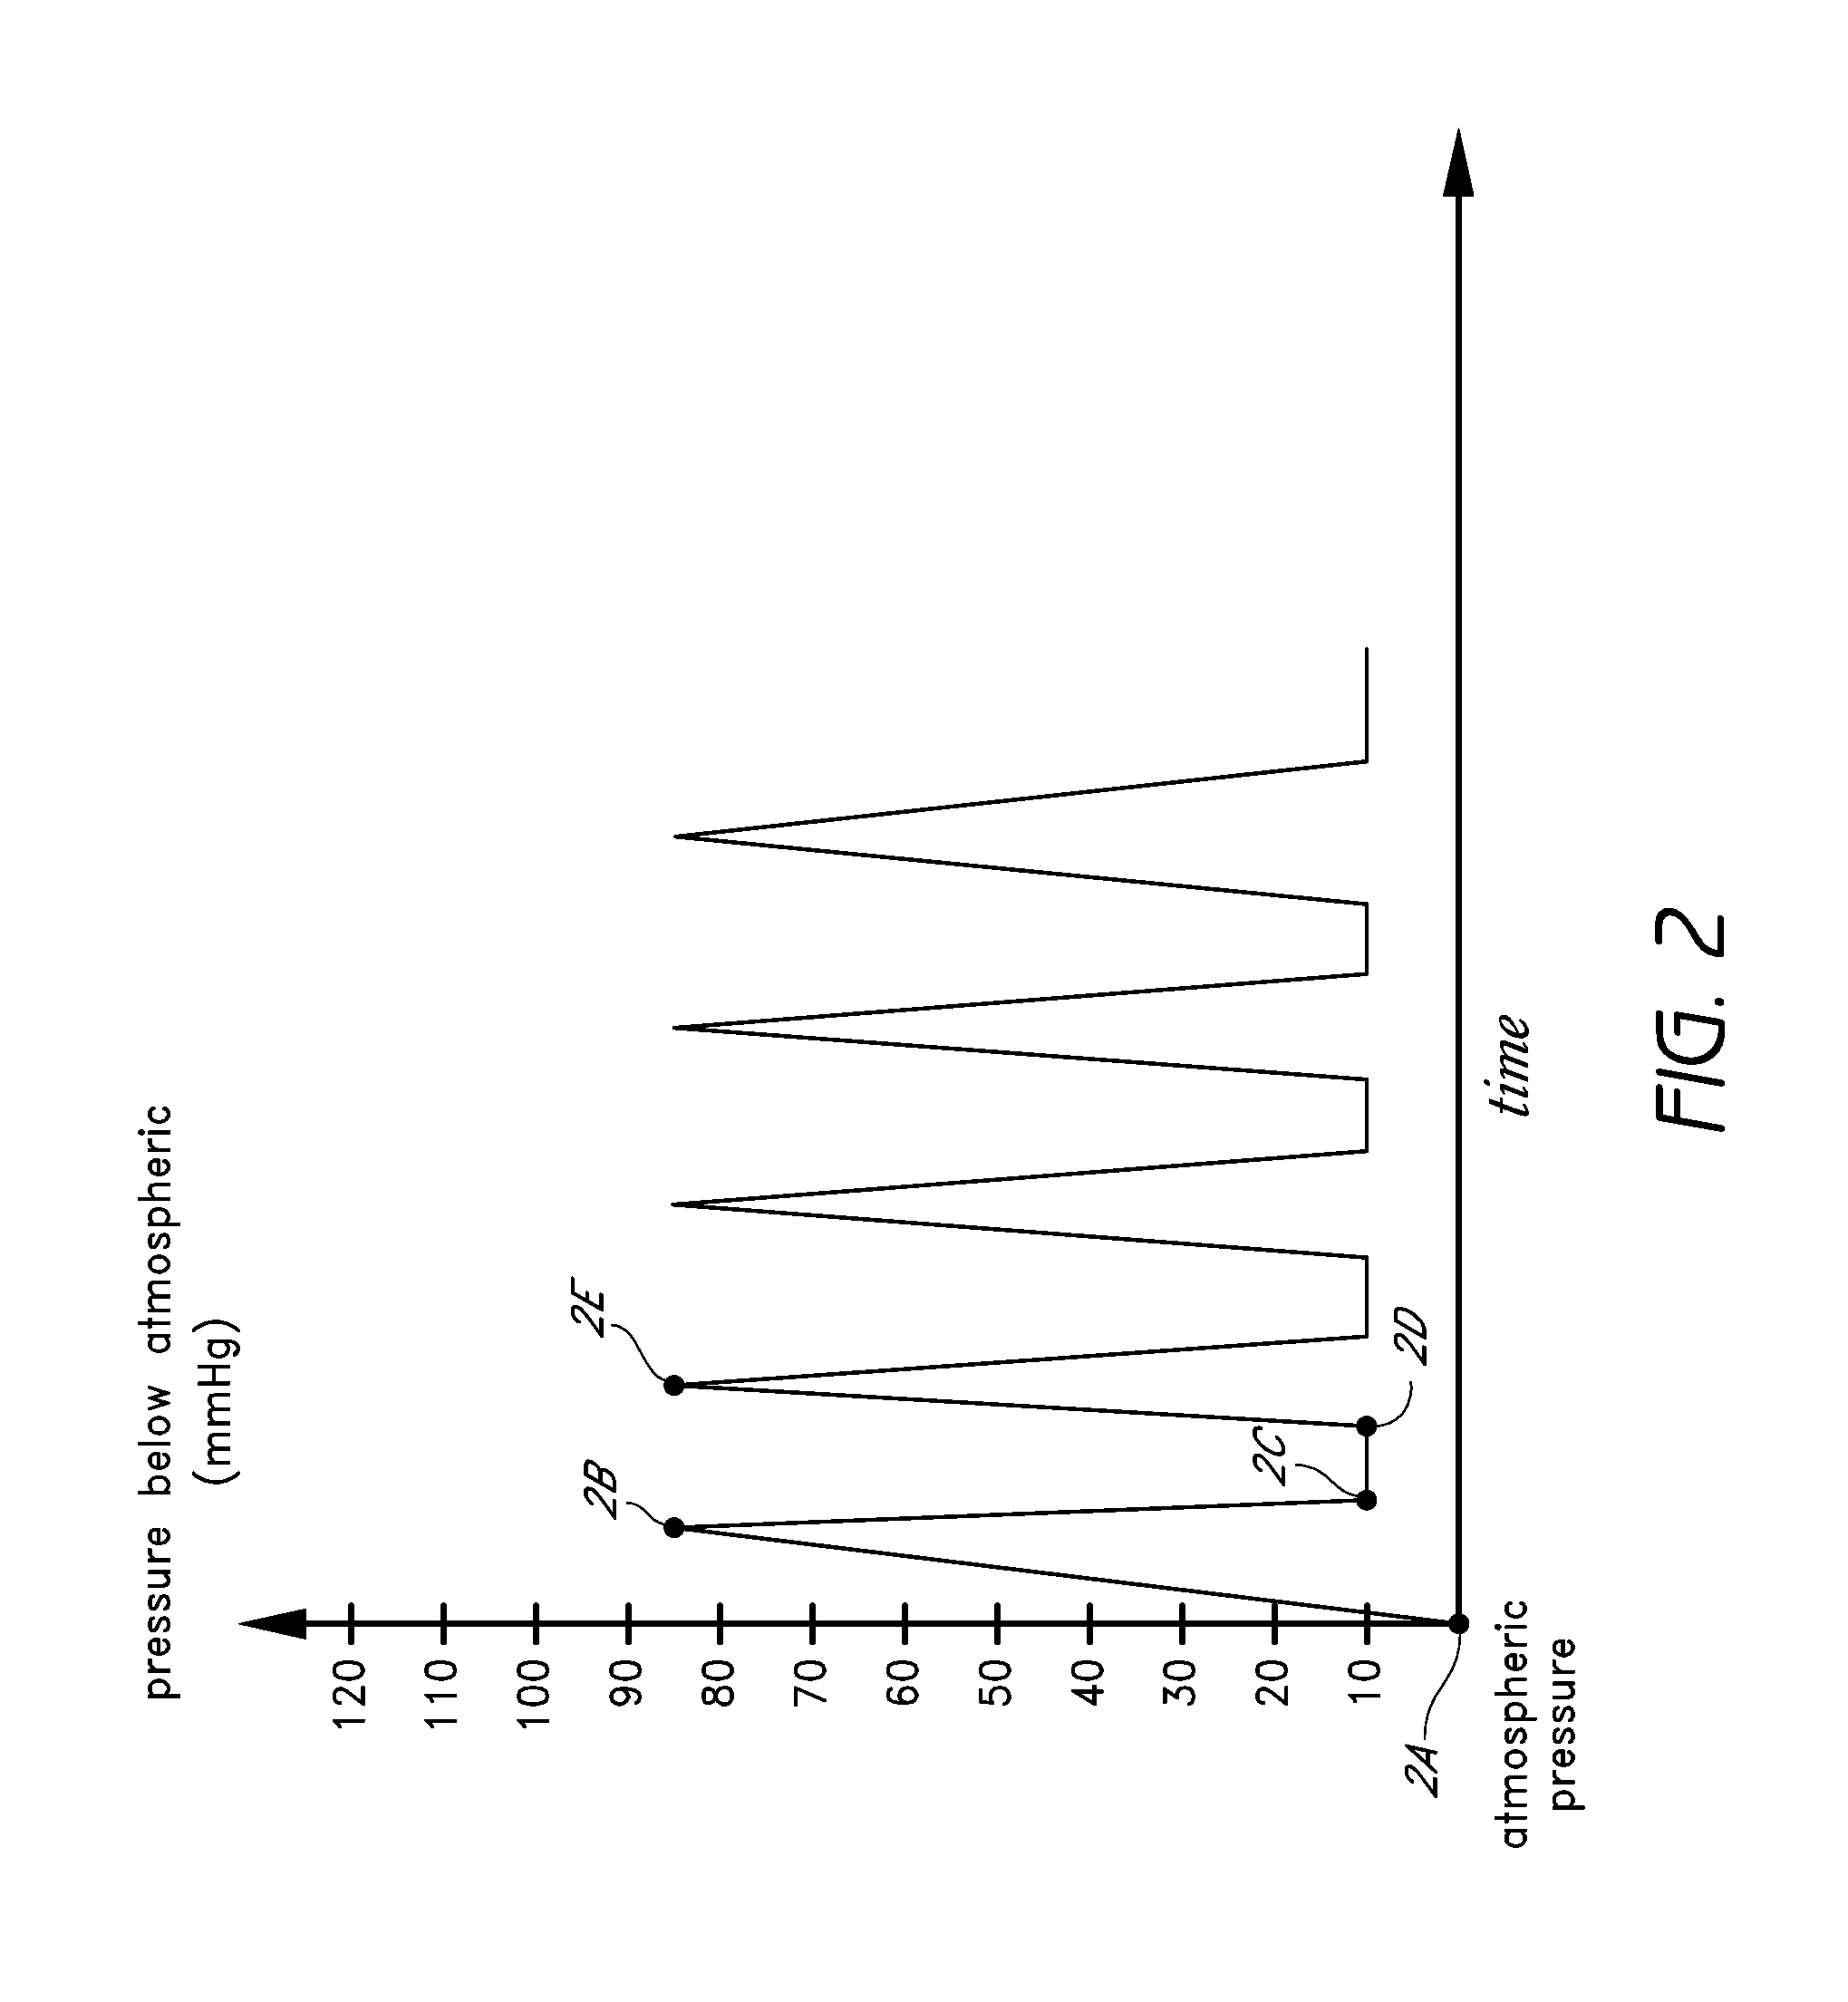 Sustained variable negative pressure wound treatment and method of controlling same